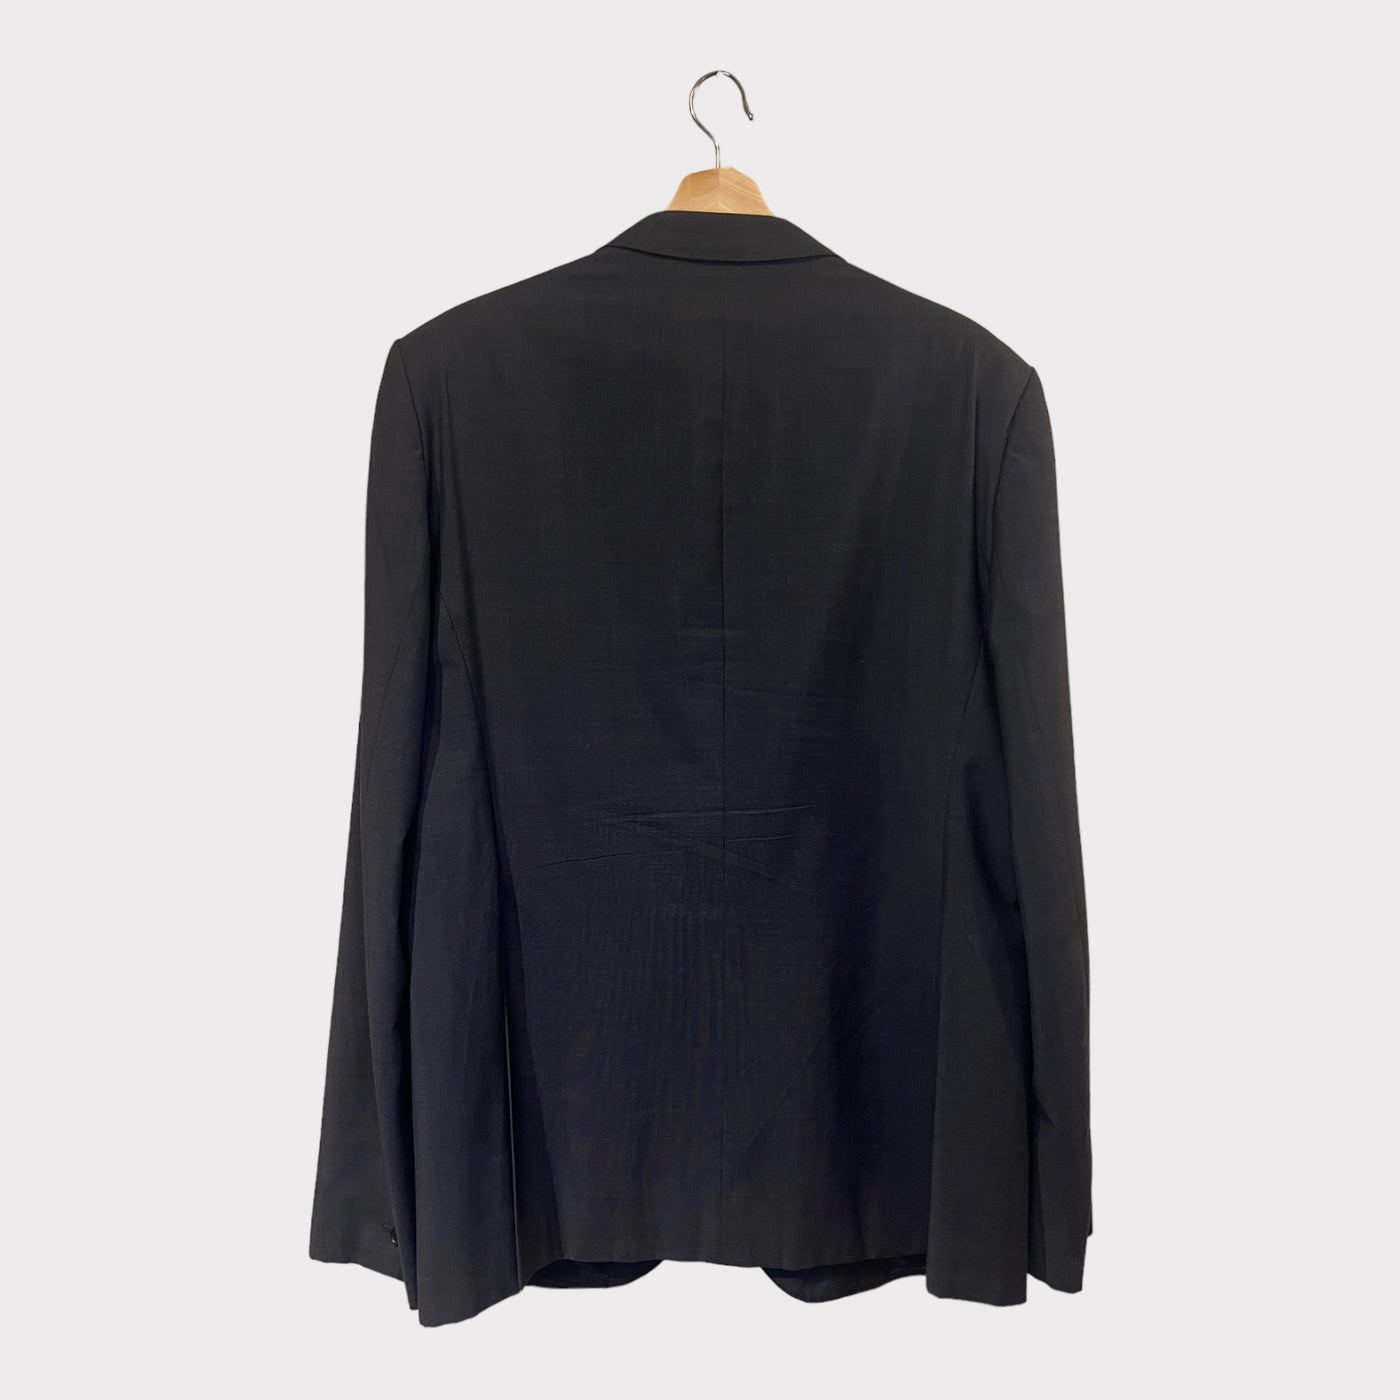 Tailored Blazer Jacket From Acne Jeans - Back